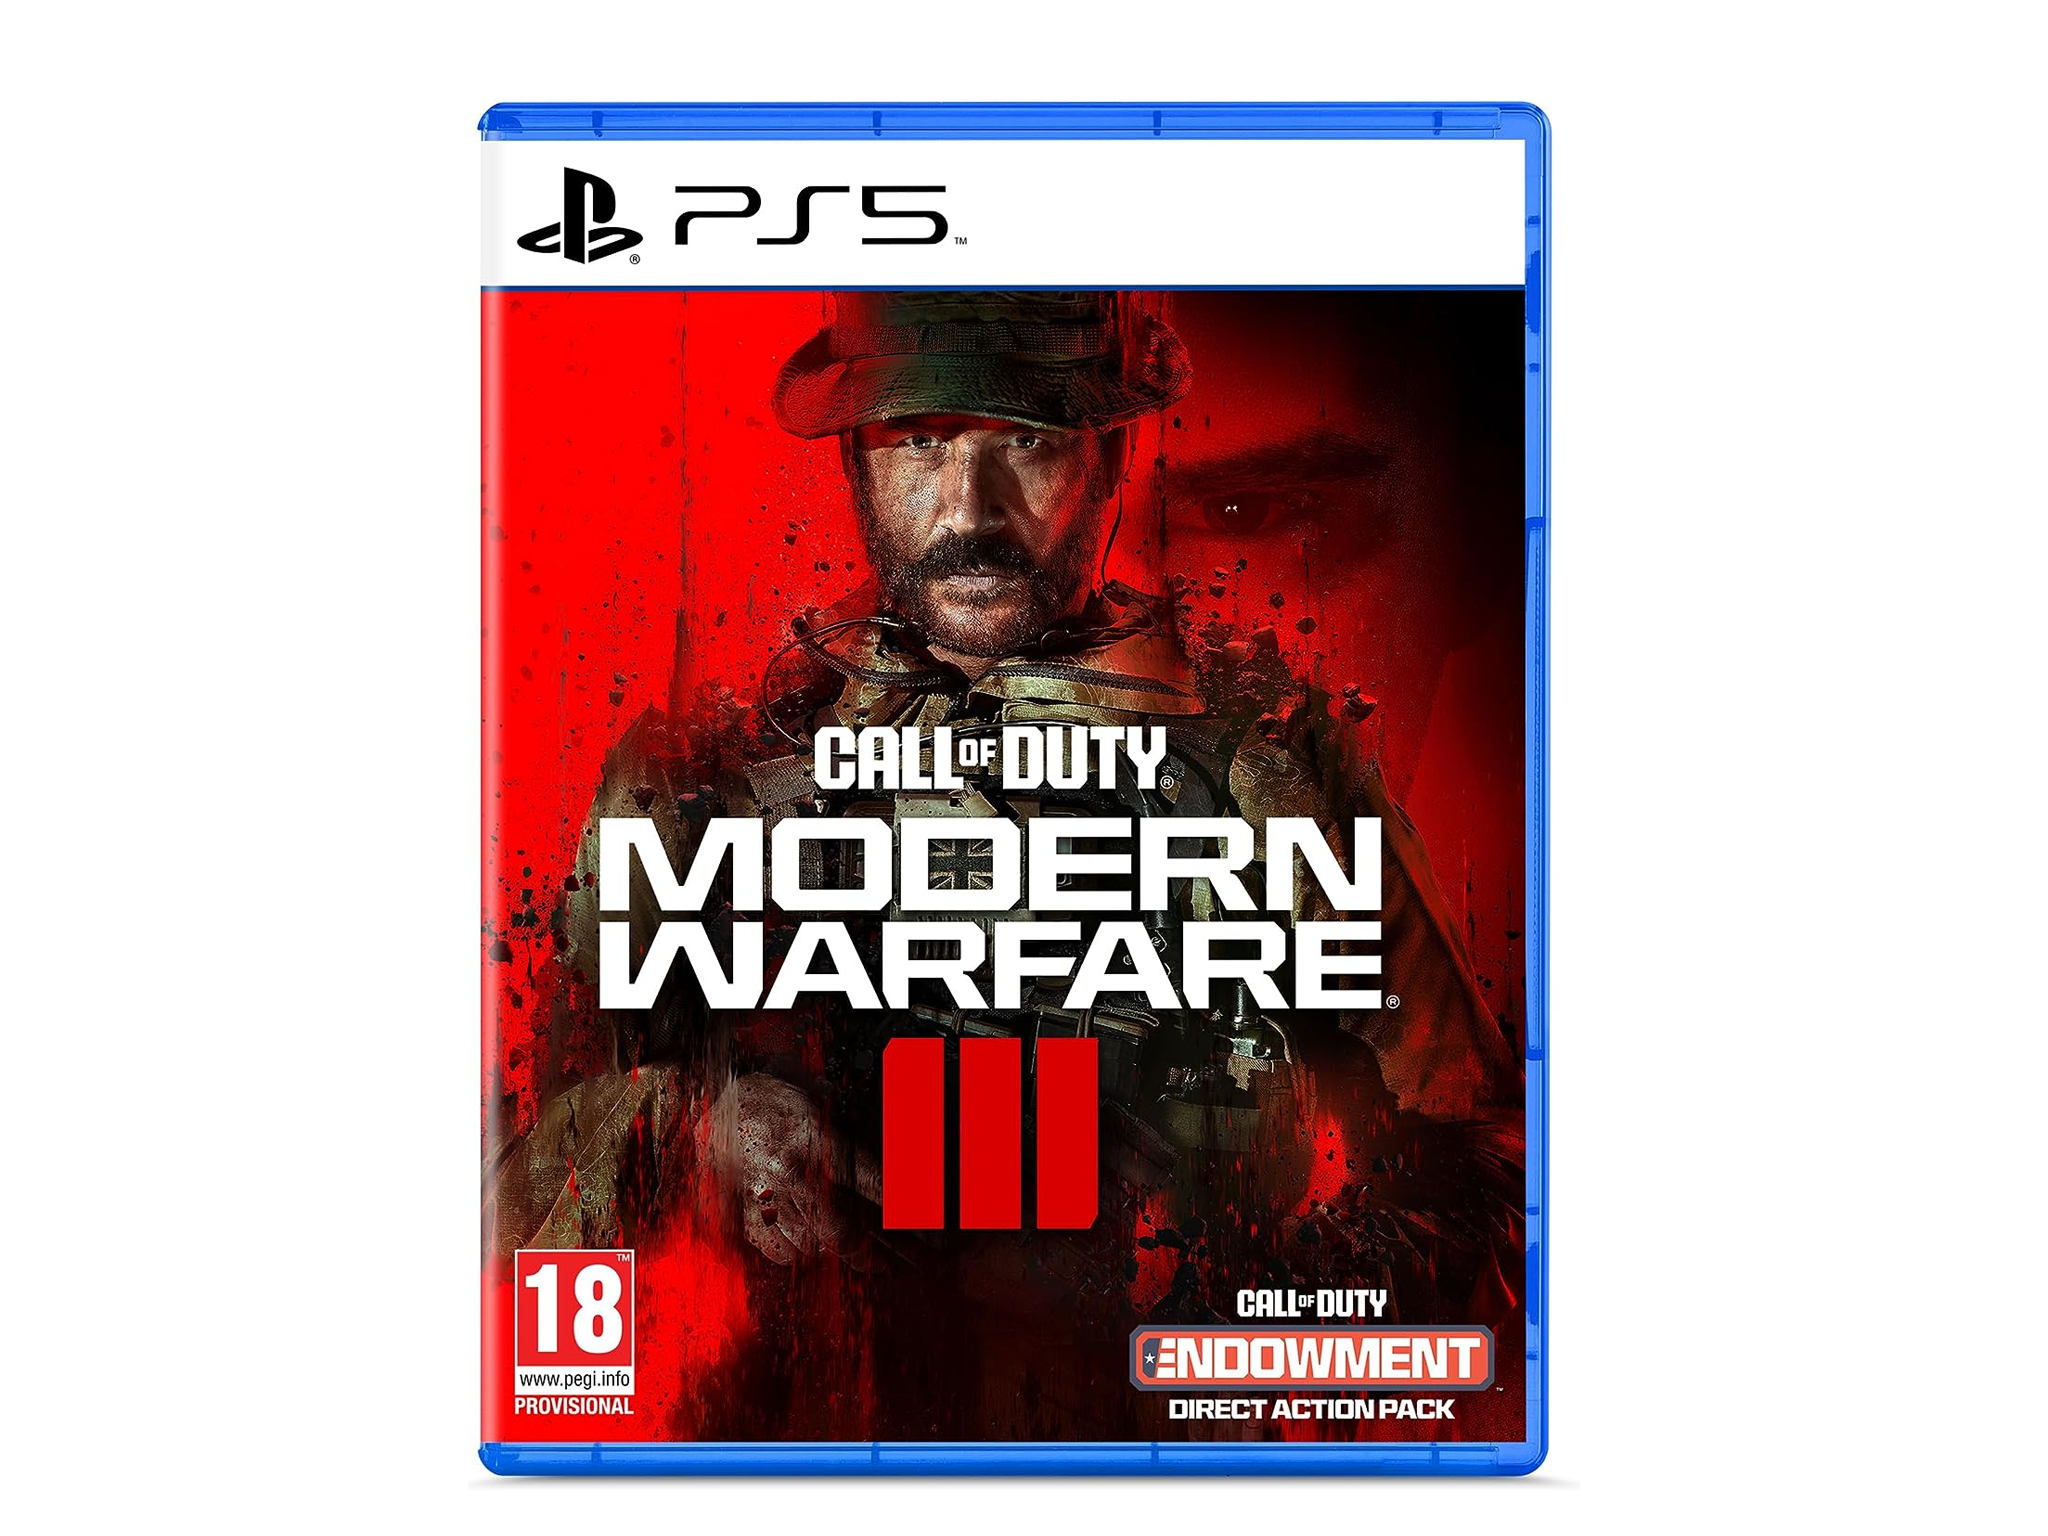 Call of Duty: Modern Warfare 3 runs well on PS5 and Series X - but